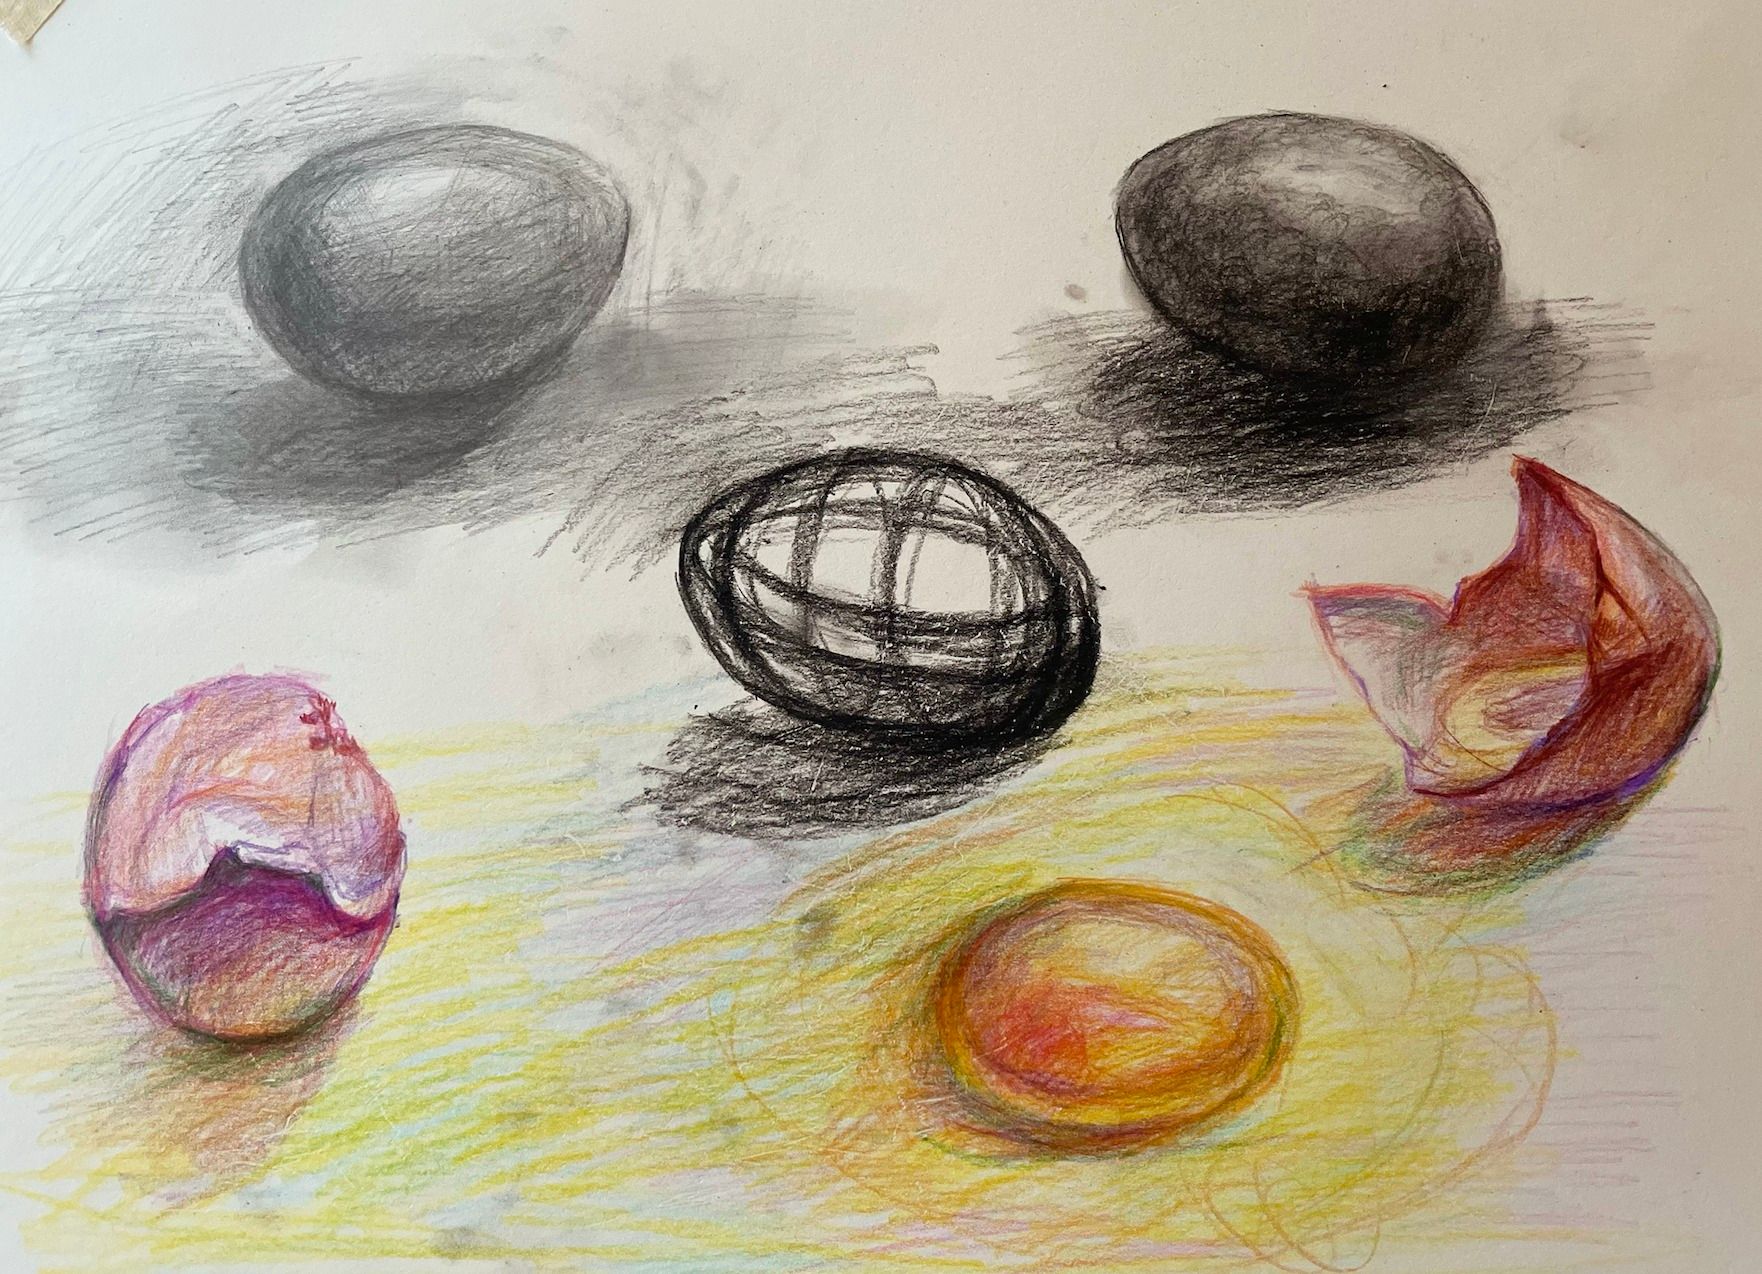 Sketches of eggs in different states. Whole in grey, whole in black, just the frame of an egg in black, cracked open with half in pink, half in red and a yolk in between. 